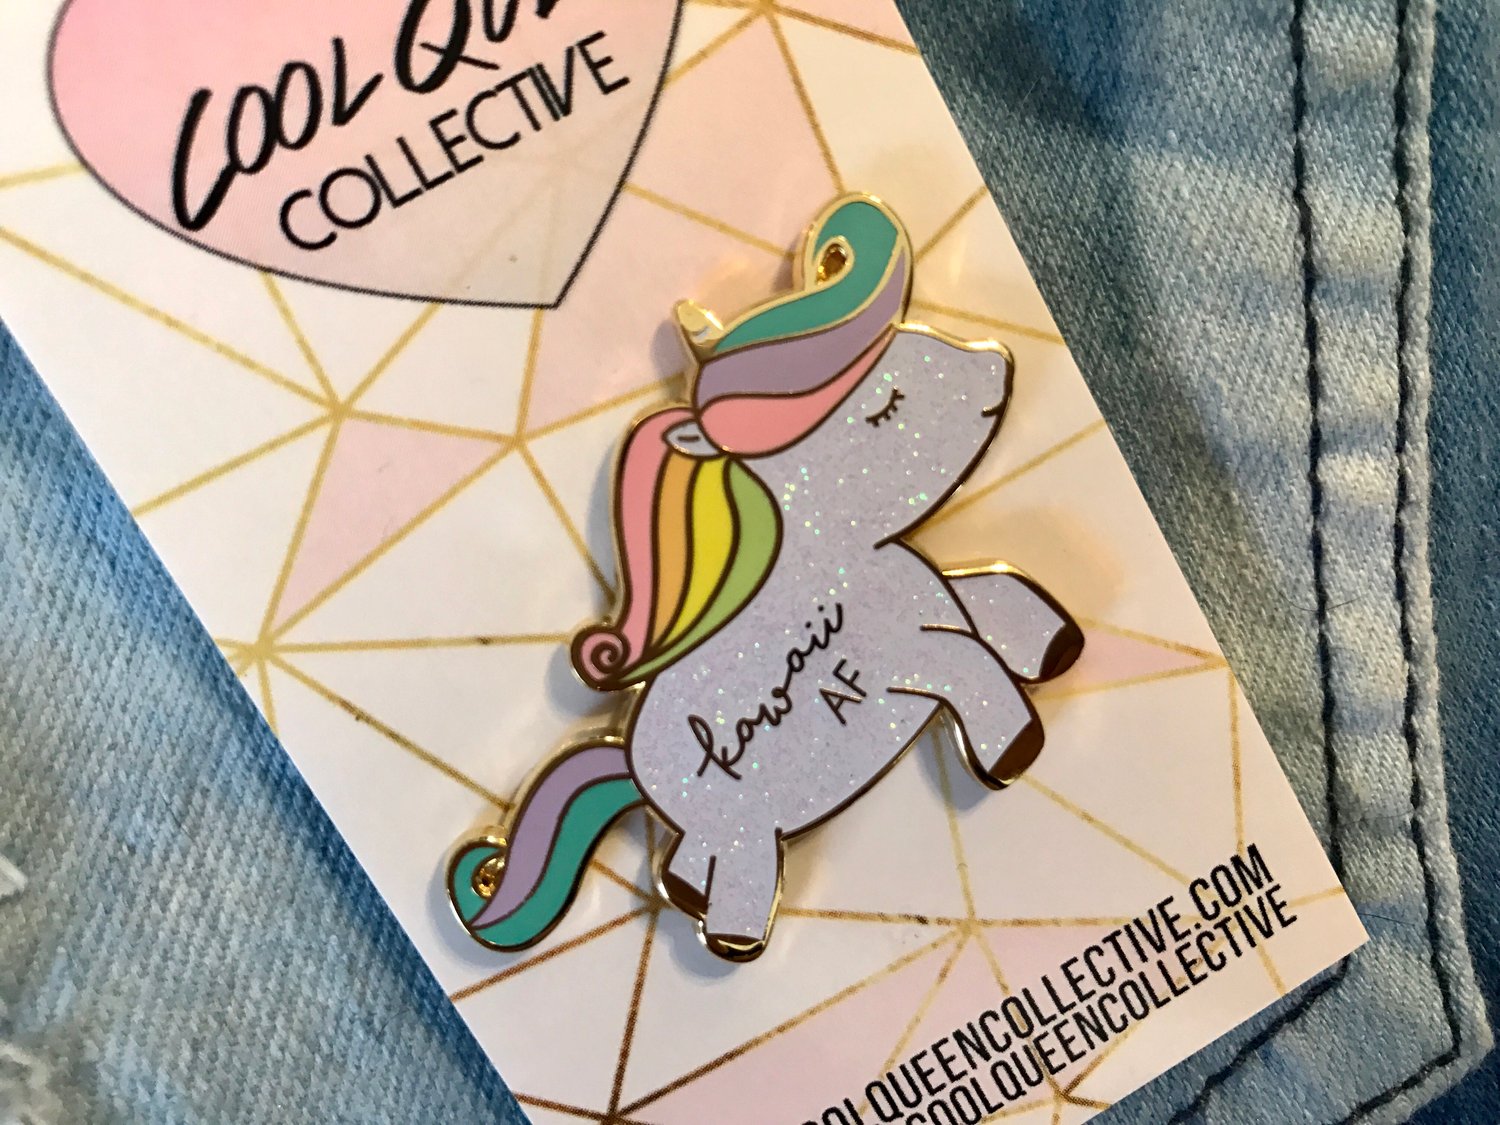 Unicorn rainbow enamel pin badge is a cute kawaii gift for her or him and  every unicorn lover. -  Nederland